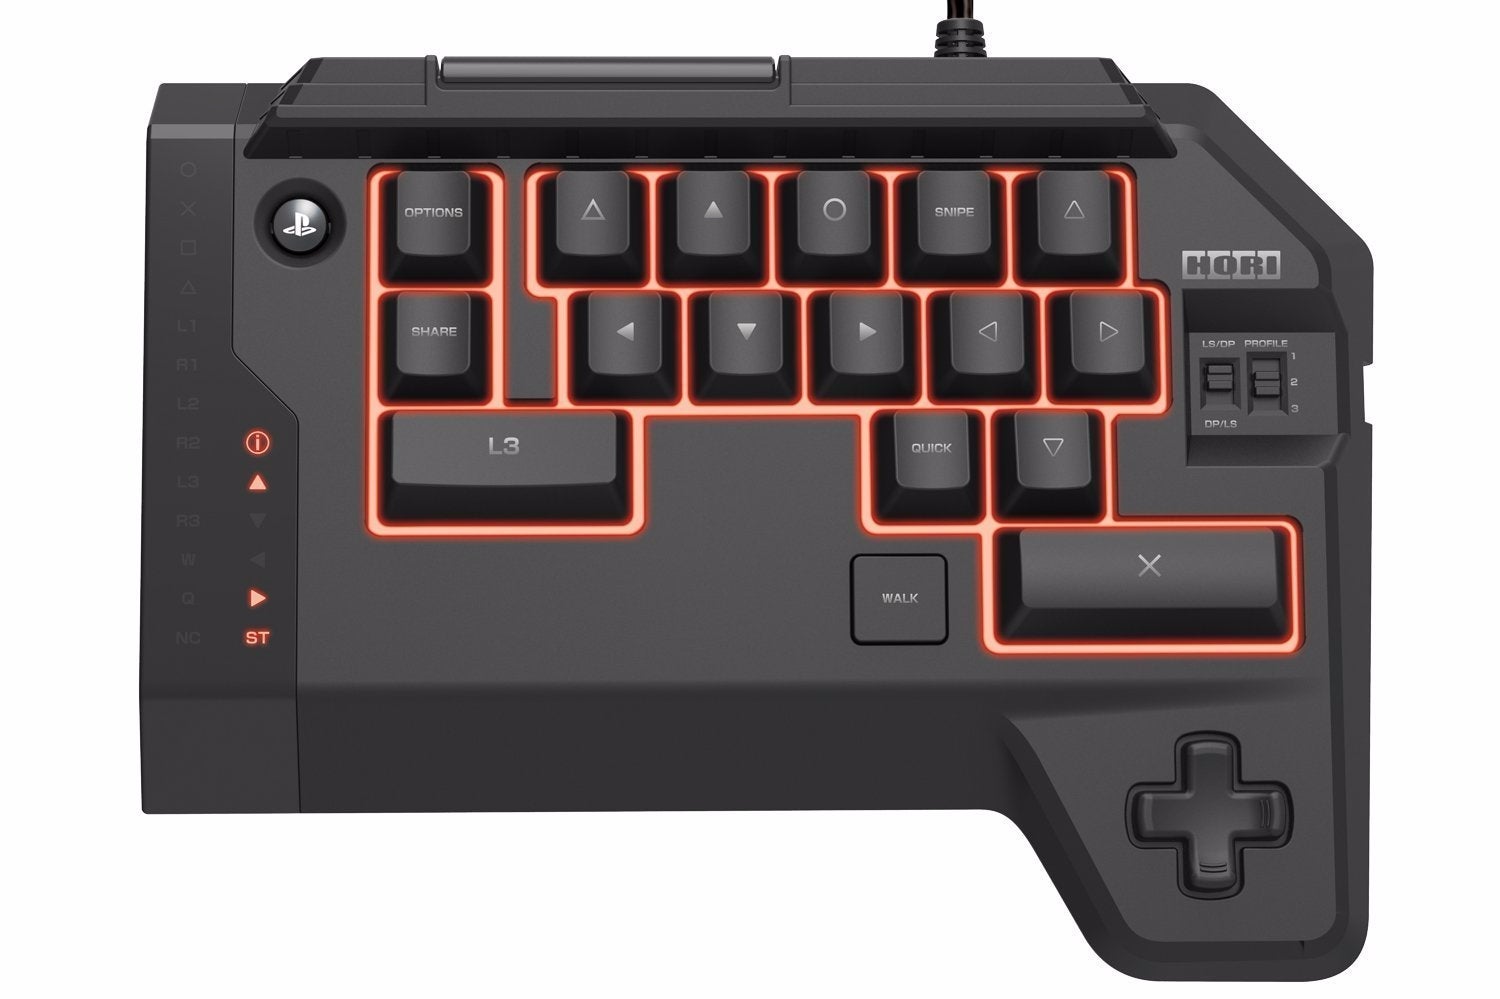 Contabilidad lineal acortar PS4 keyboard / mouse controller replicates PC FPS-style gaming |  Eurogamer.net